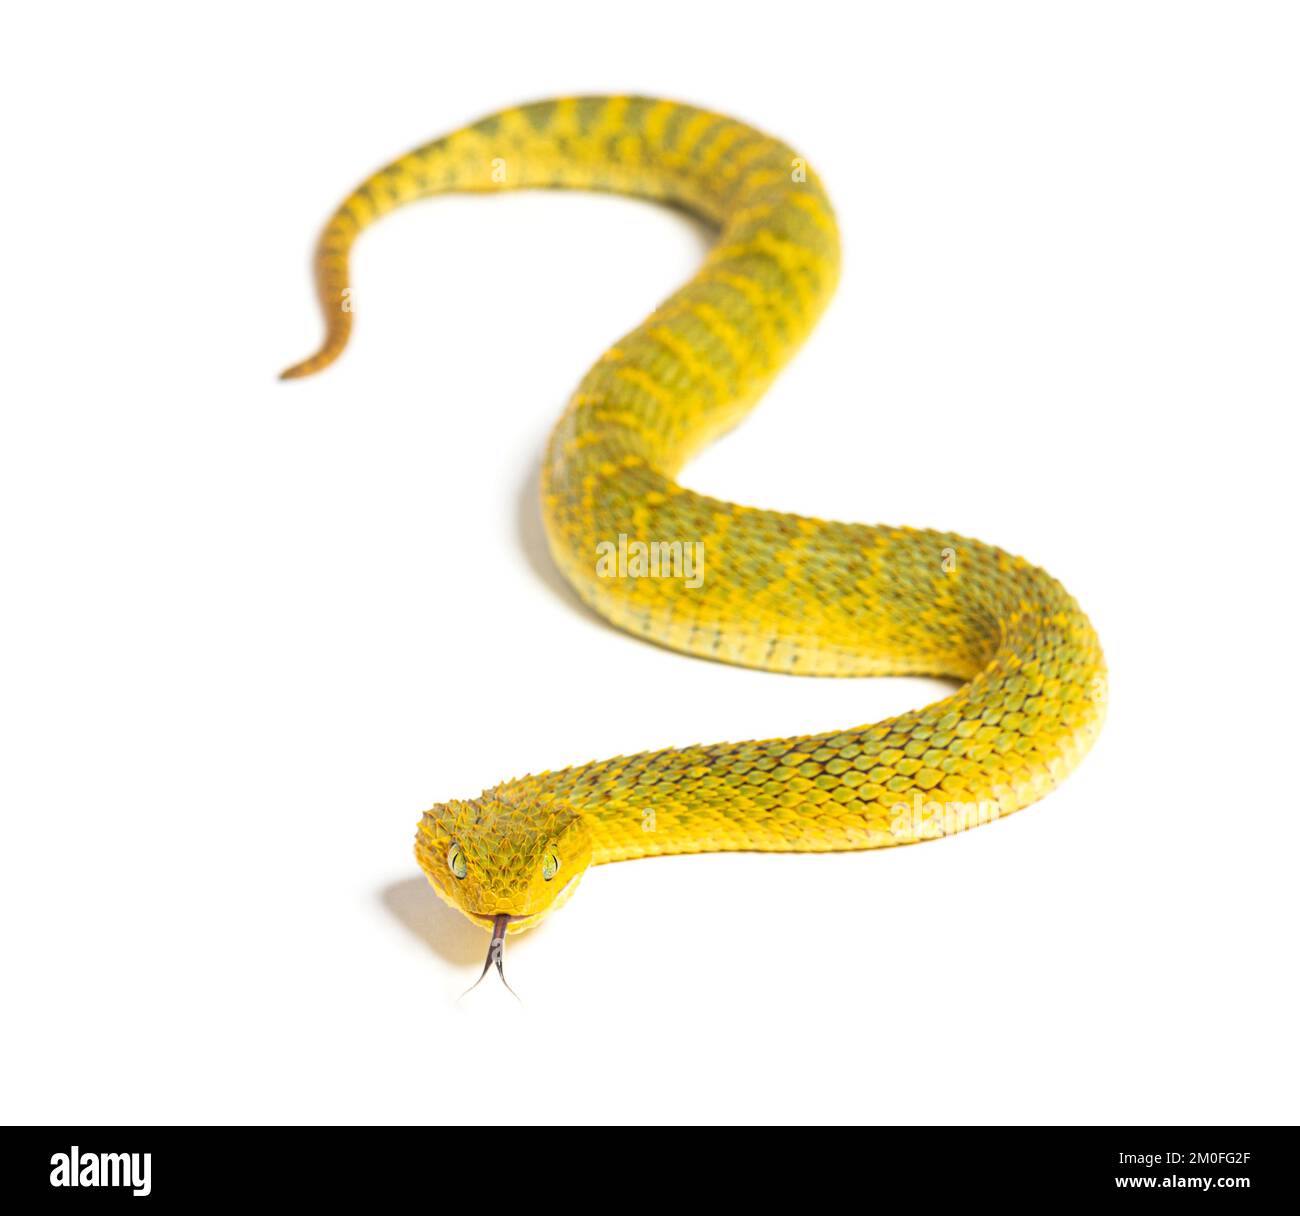 Close-up Of A Yellow Variable Bush Viper (Atheris Squamigera) From Central  African Countries. Stock Photo, Picture and Royalty Free Image. Image  153408574.